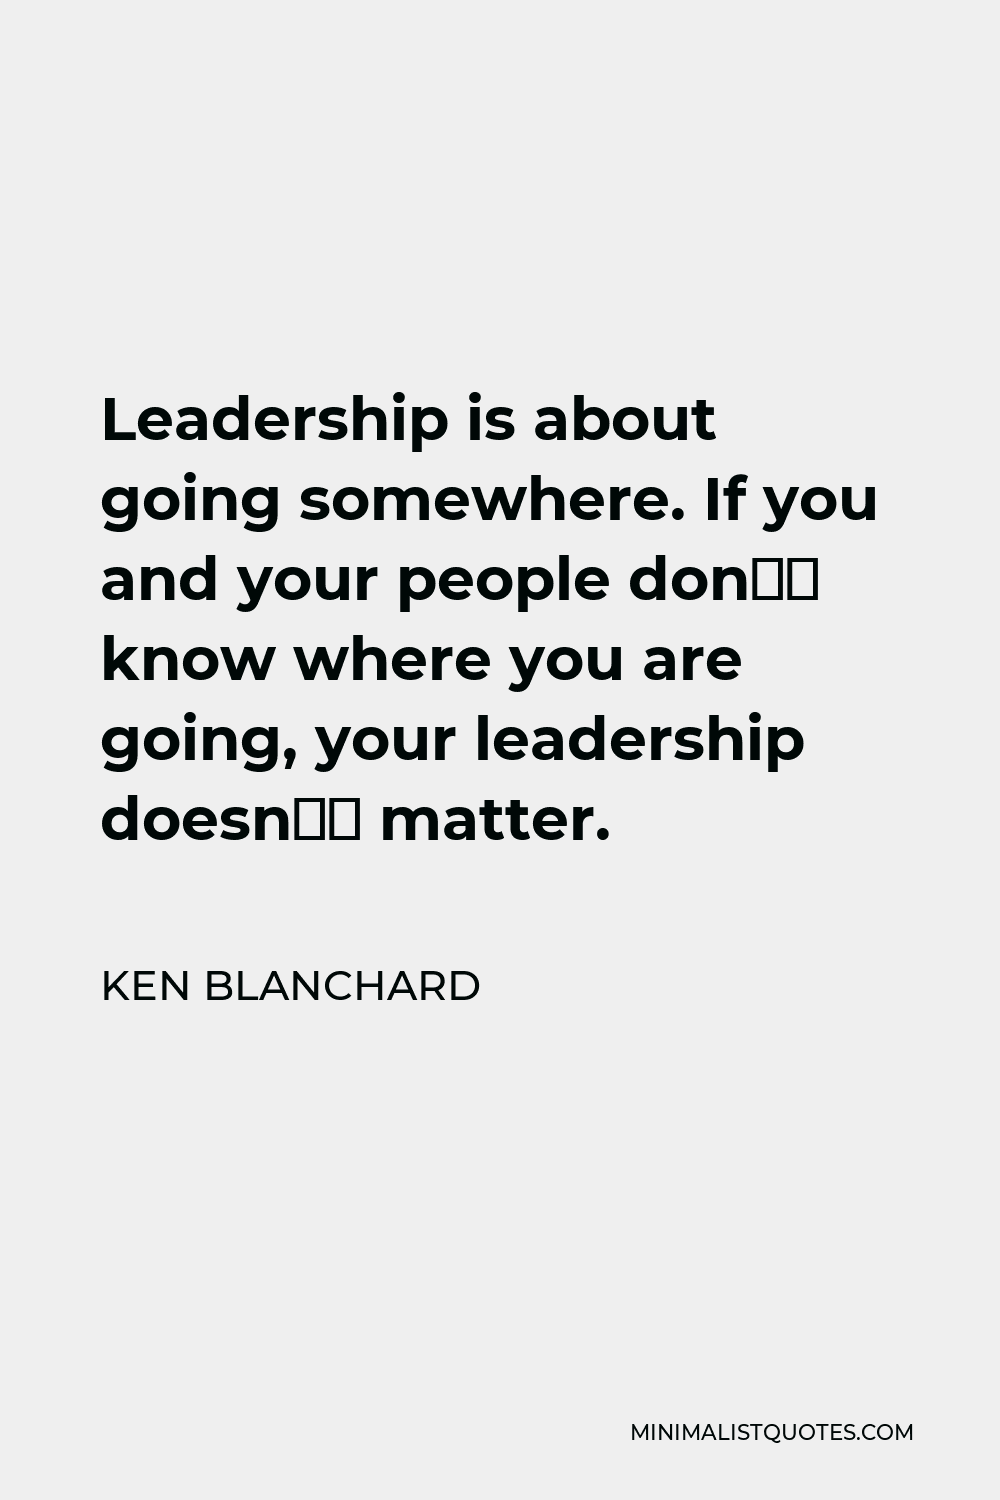 Ken Blanchard Quote - Leadership is about going somewhere. If you and your people don’t know where you are going, your leadership doesn’t matter.